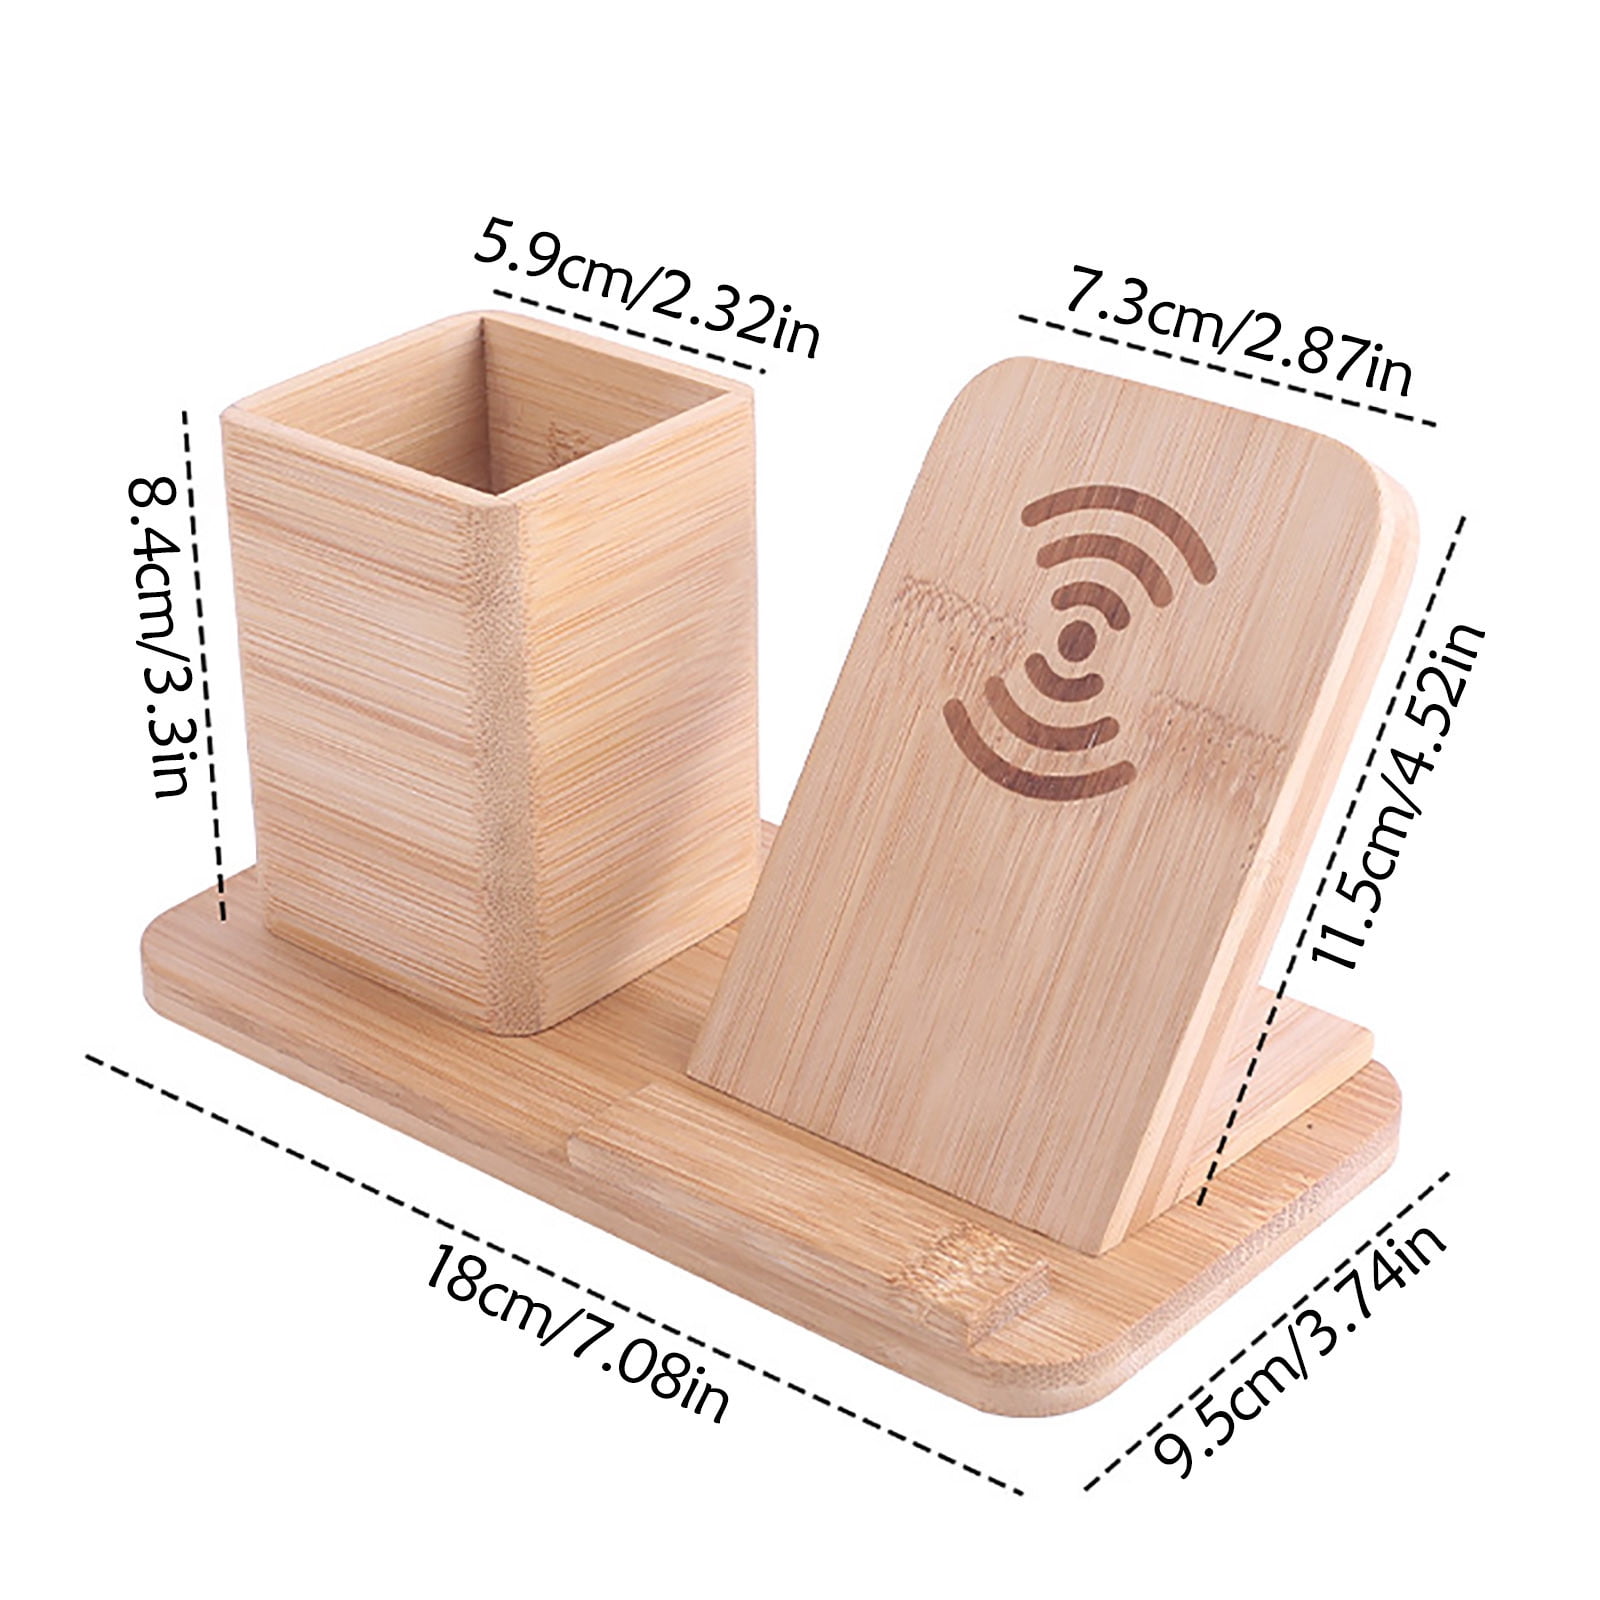 GORGECRAFT Wooden WiFi Sign Password Wood Freestanding Board Display Holder  with Wood Base Stand for Home or Business Table Office